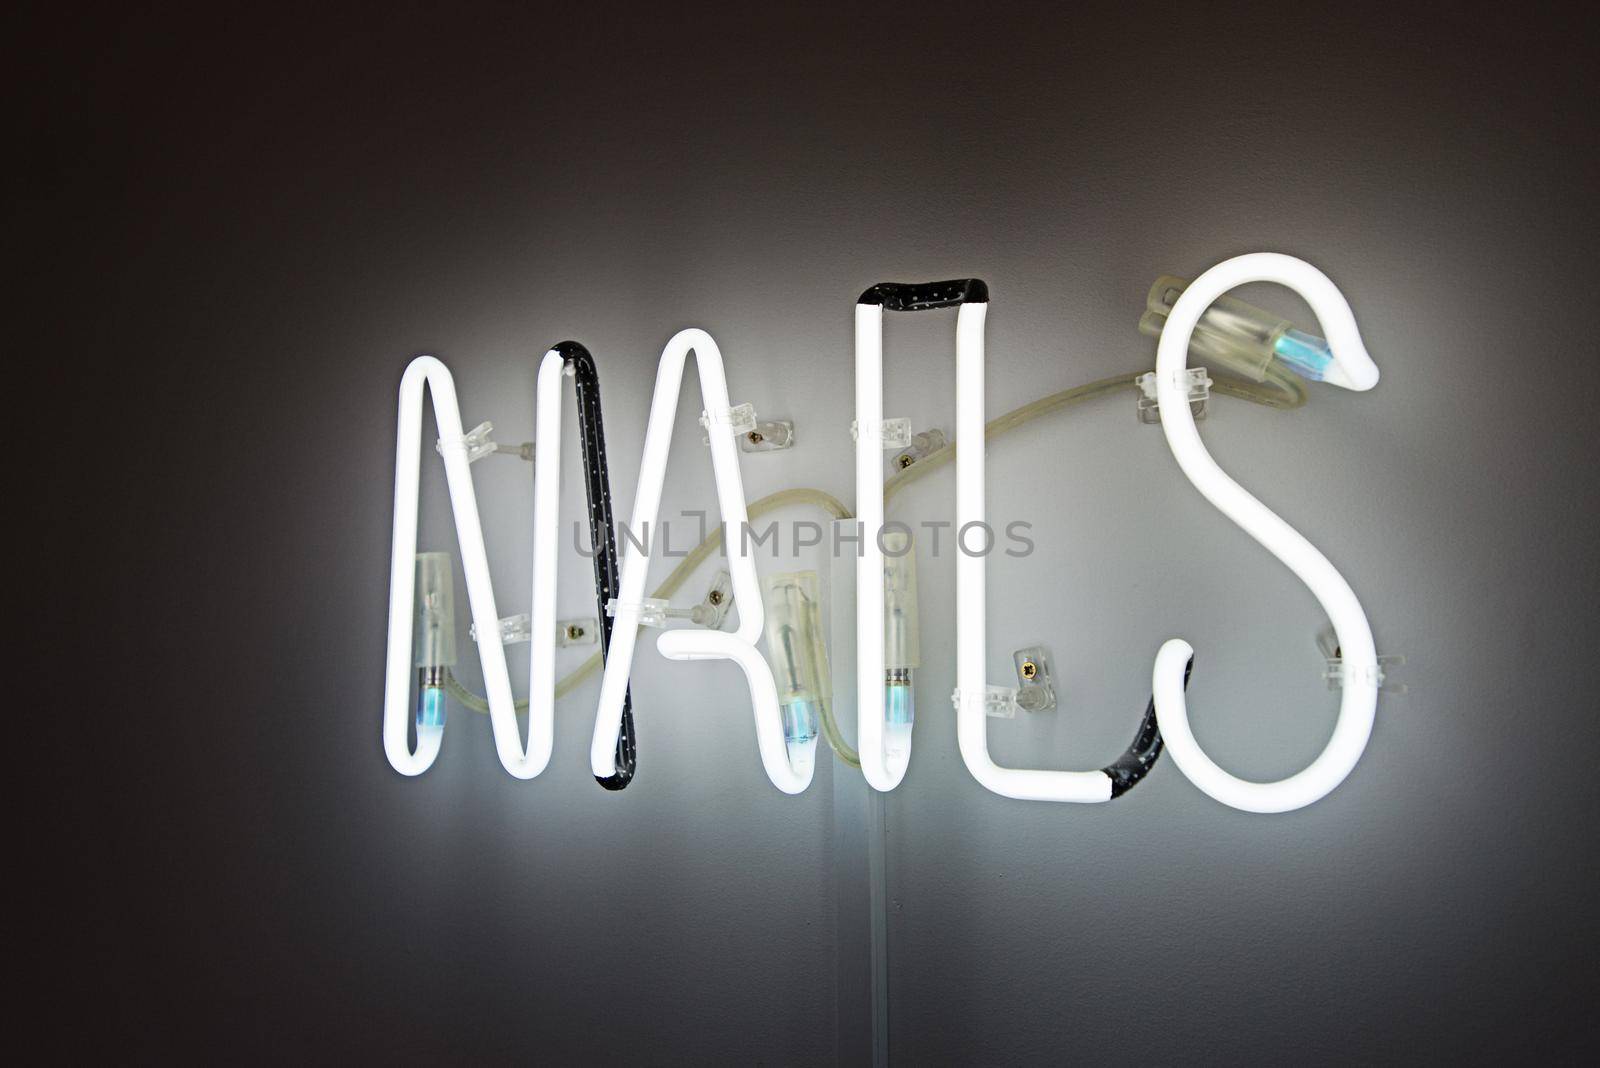 Shining Nails white Neon Label. advertising for beauty salon by Ashtray25